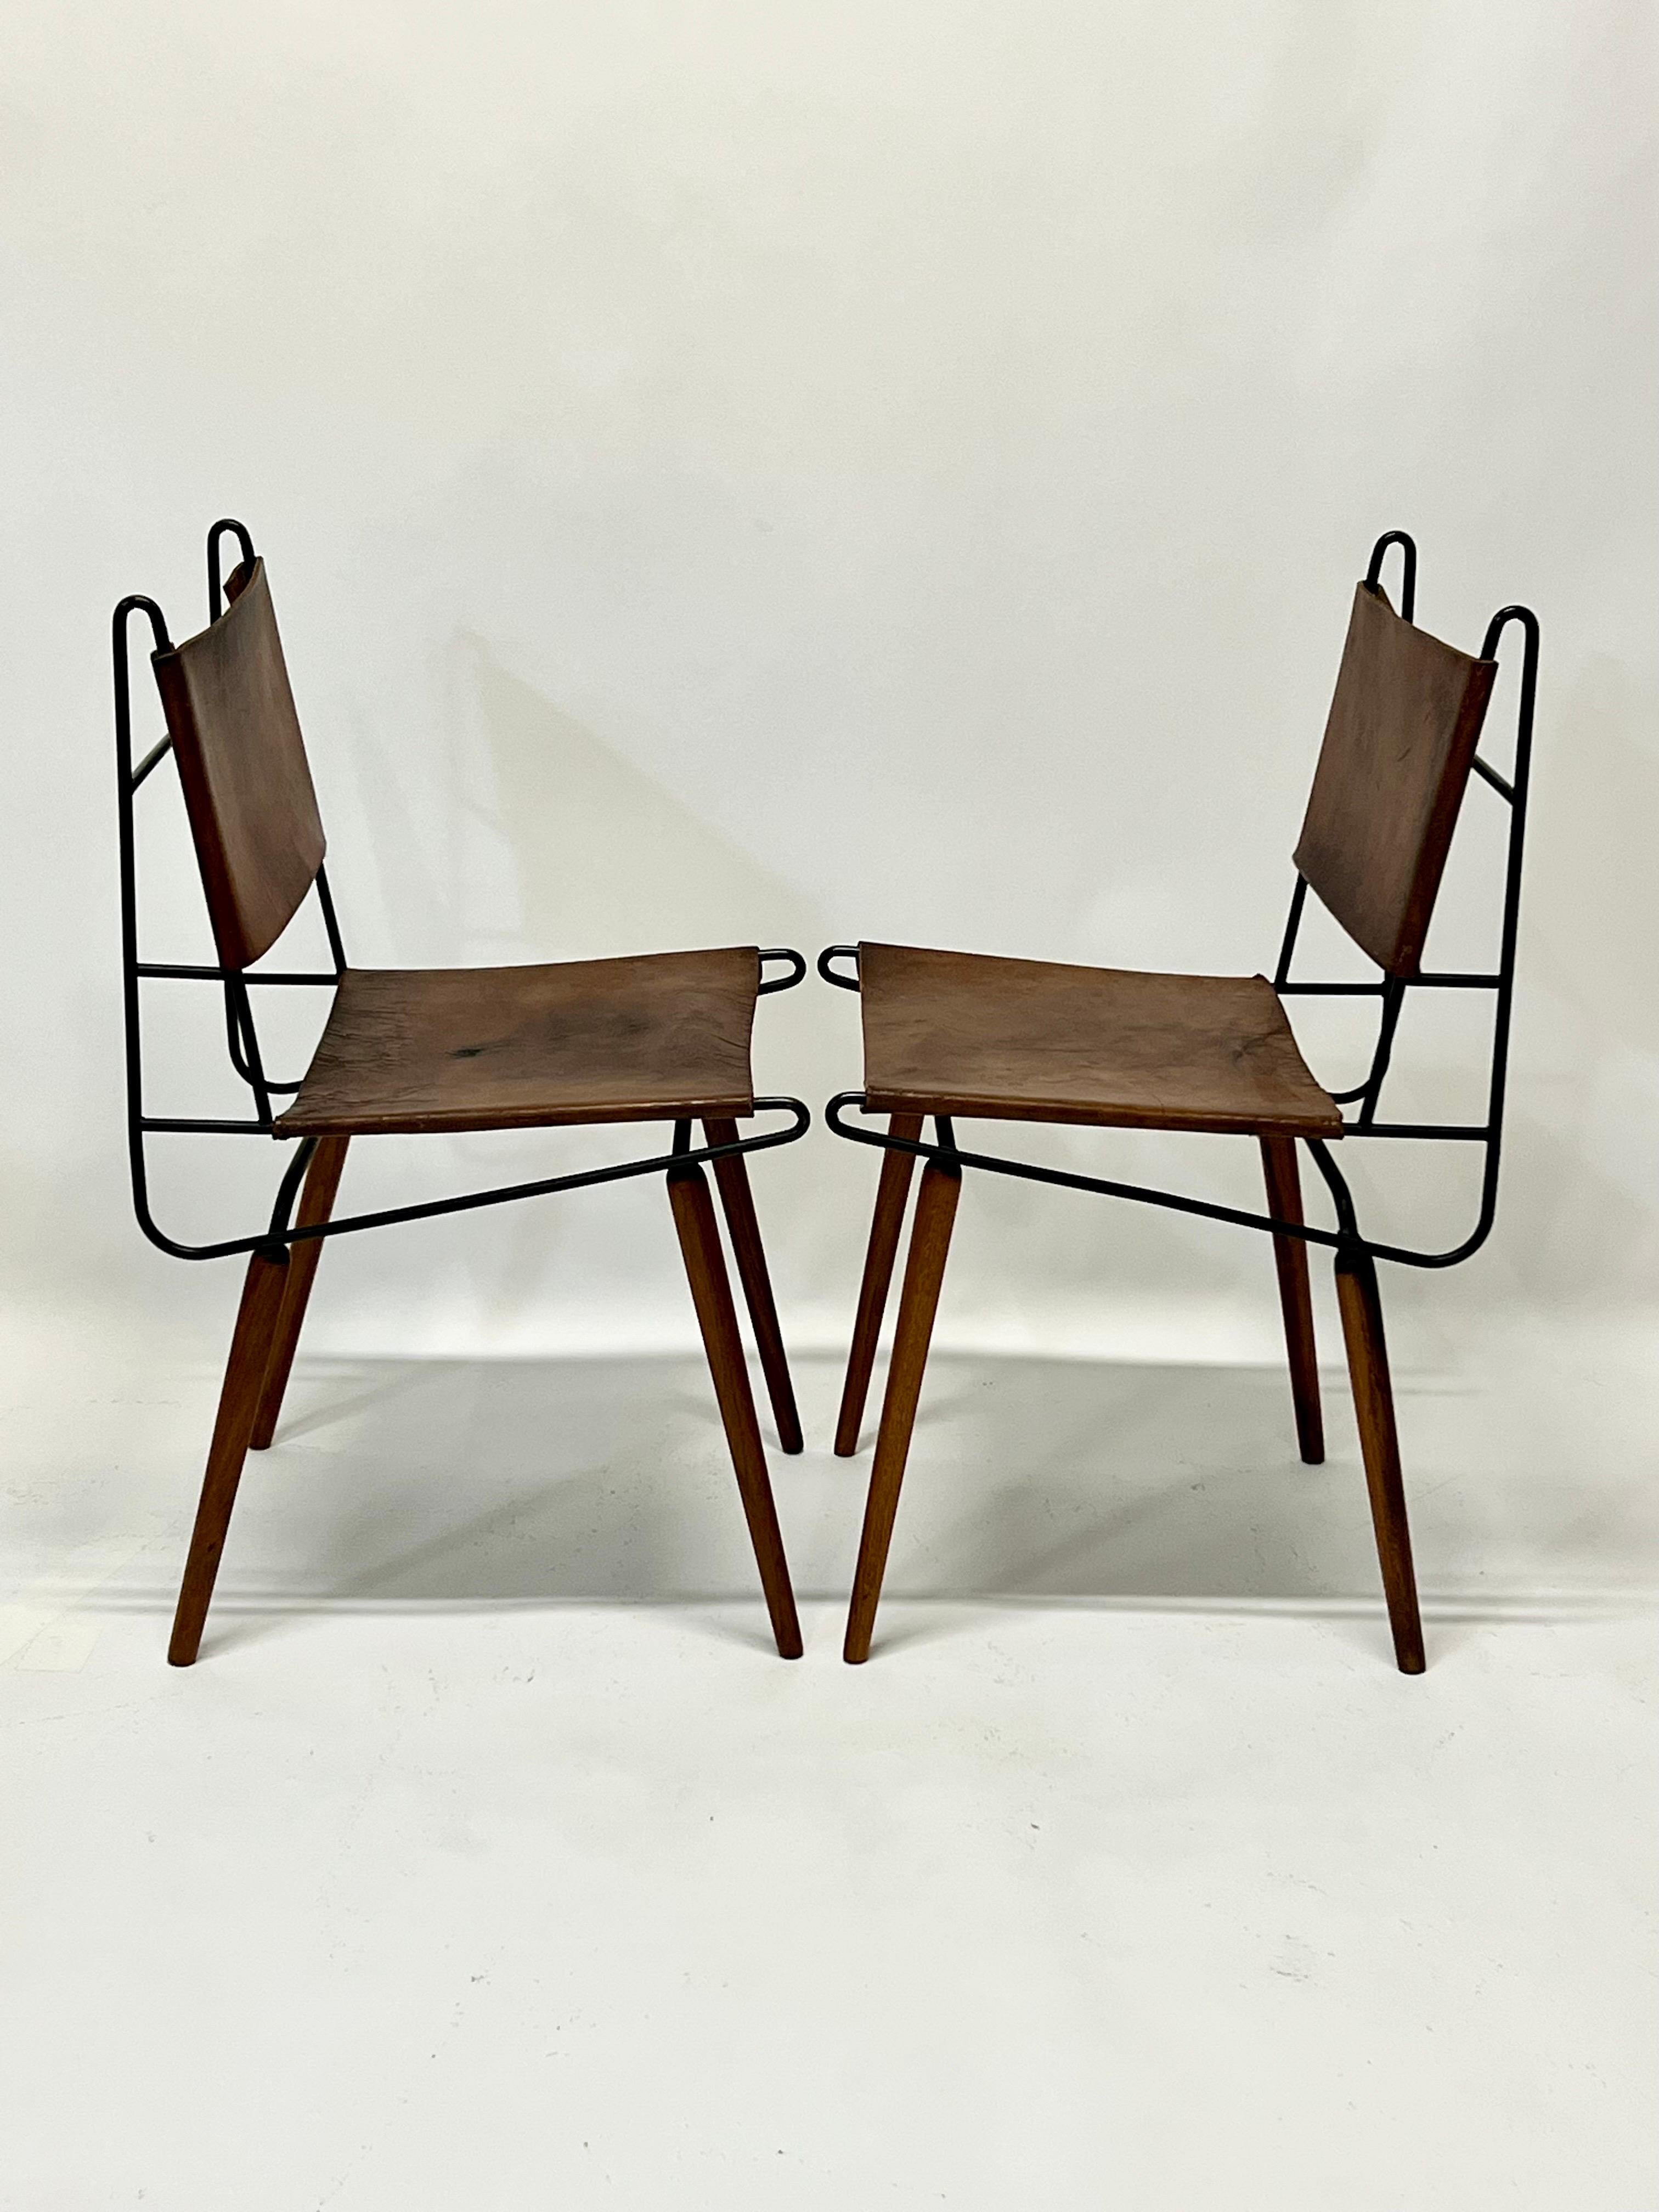 Exceedingly rare iron and leather dining chairs with wooden dowel legs by East Coast designer, Allan Gould, circa 1950s. Gould who is more known for his amazing iron string chairs, this model predates those. Only made in very small numbers, and for